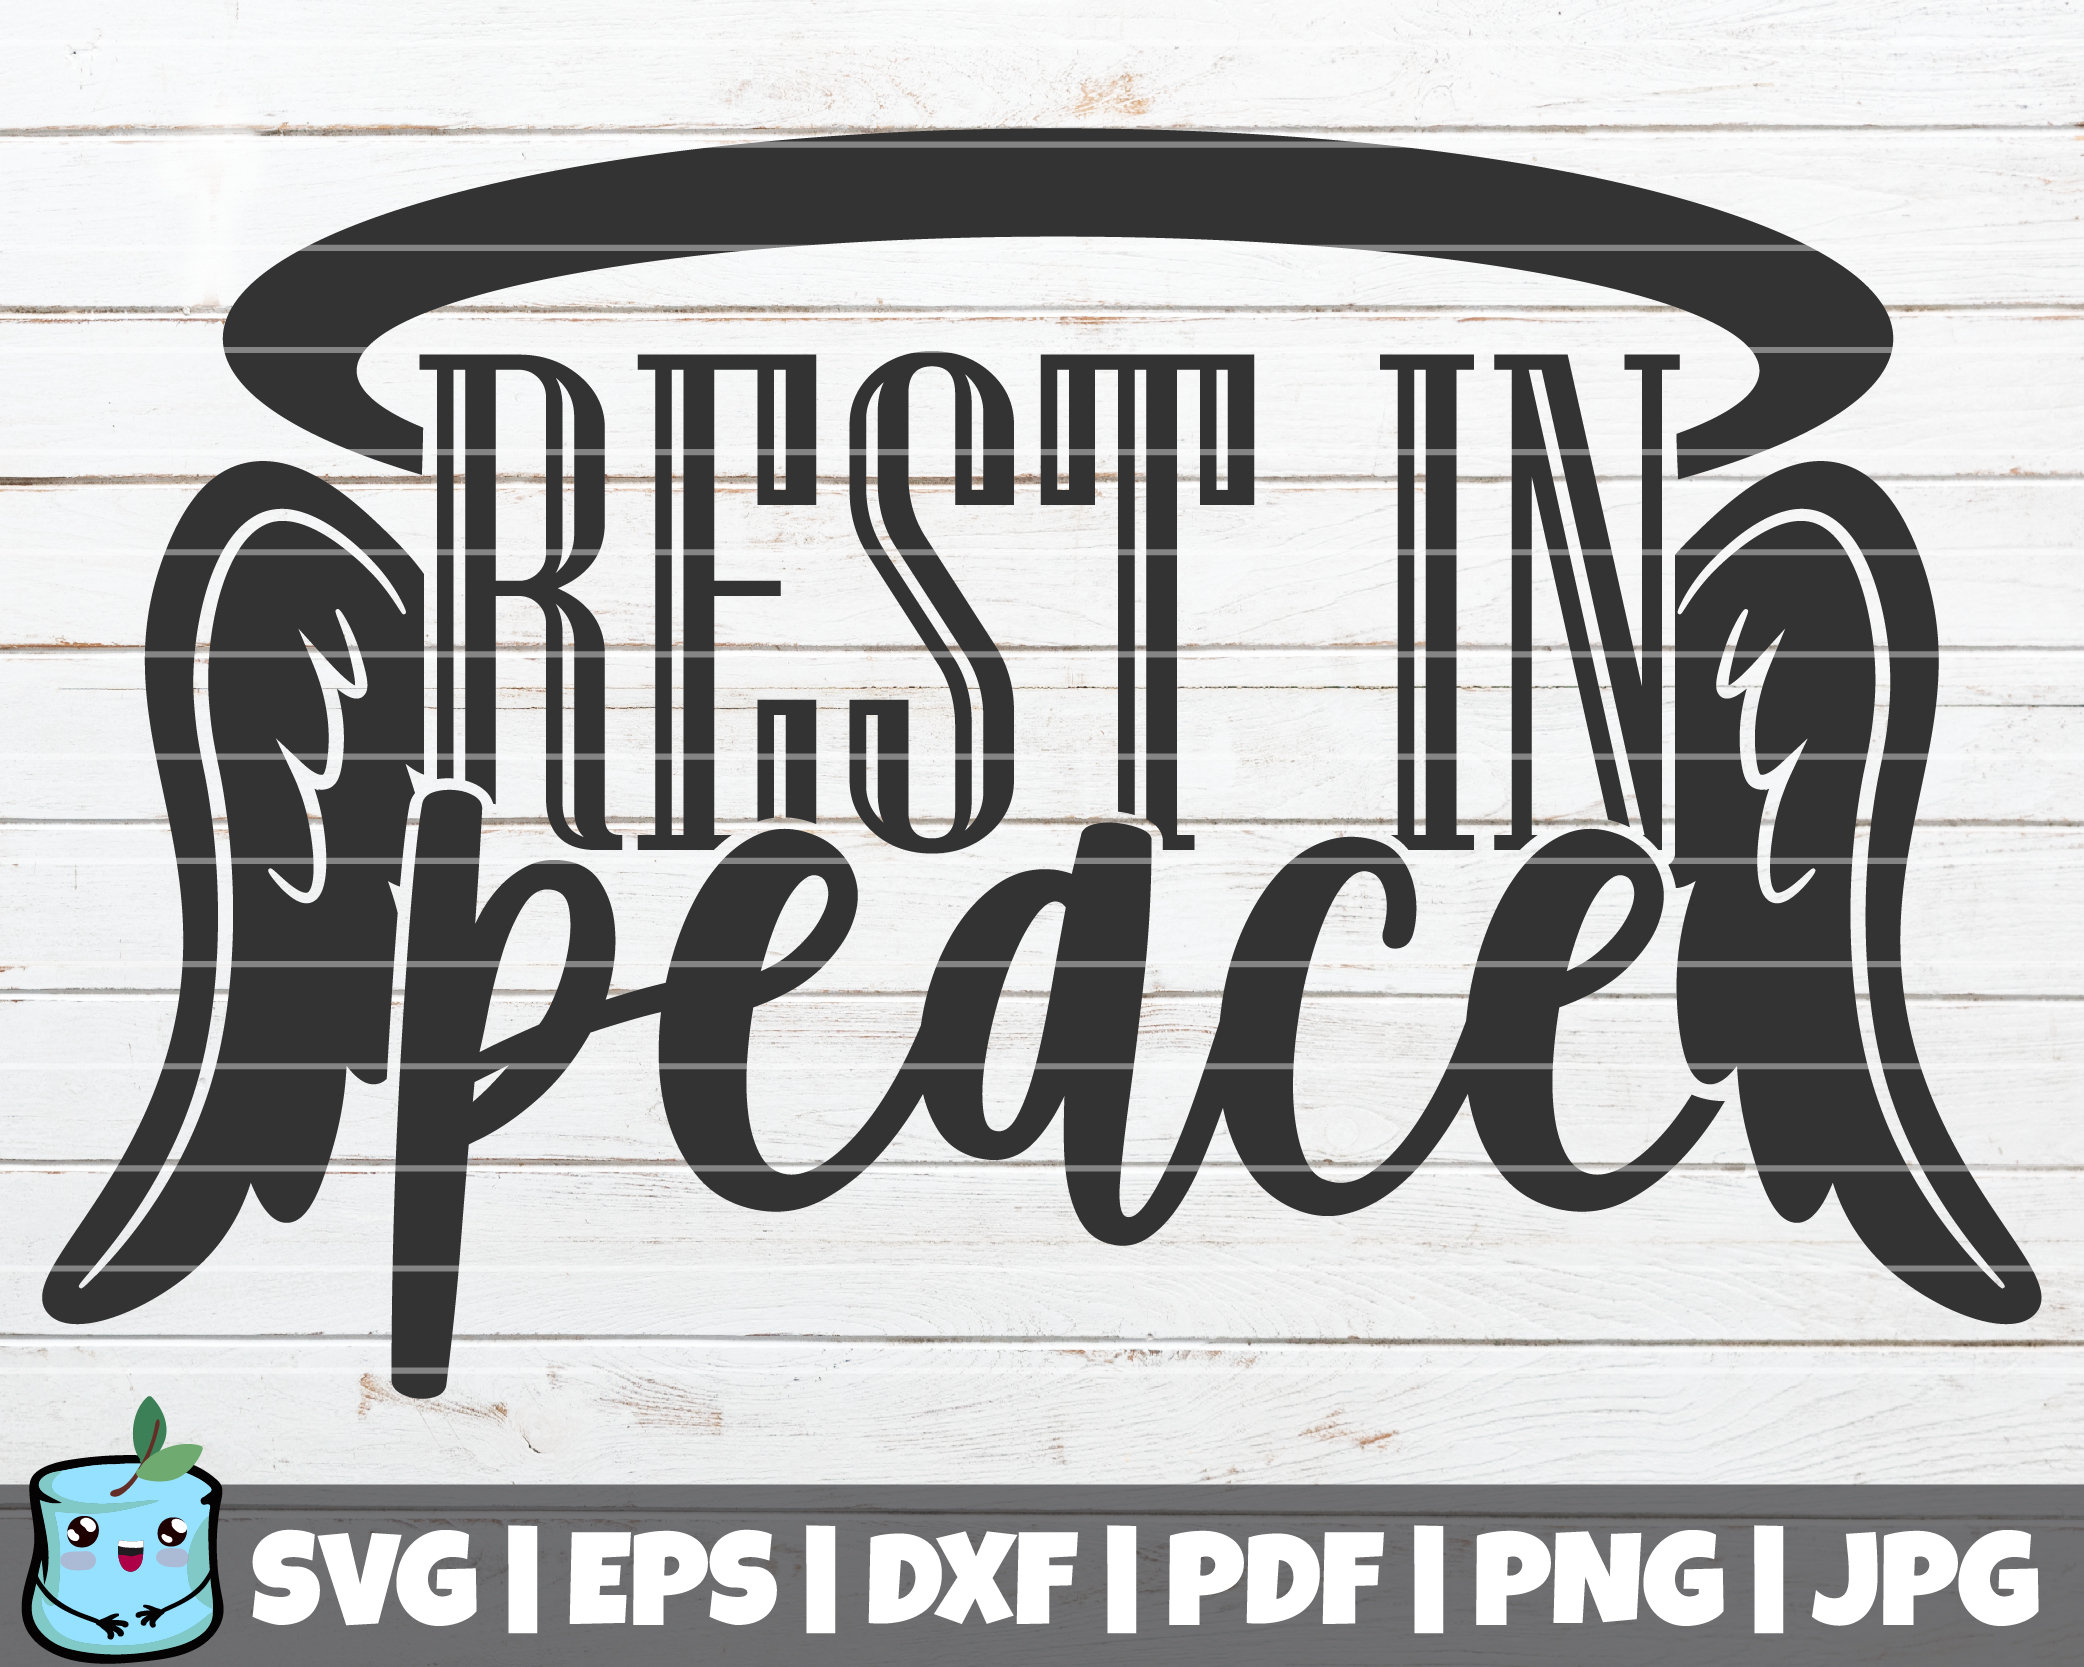 Rest in Peace Svg/eps/png/dxf/jpg/pdf Rip Svgpeace Dove 